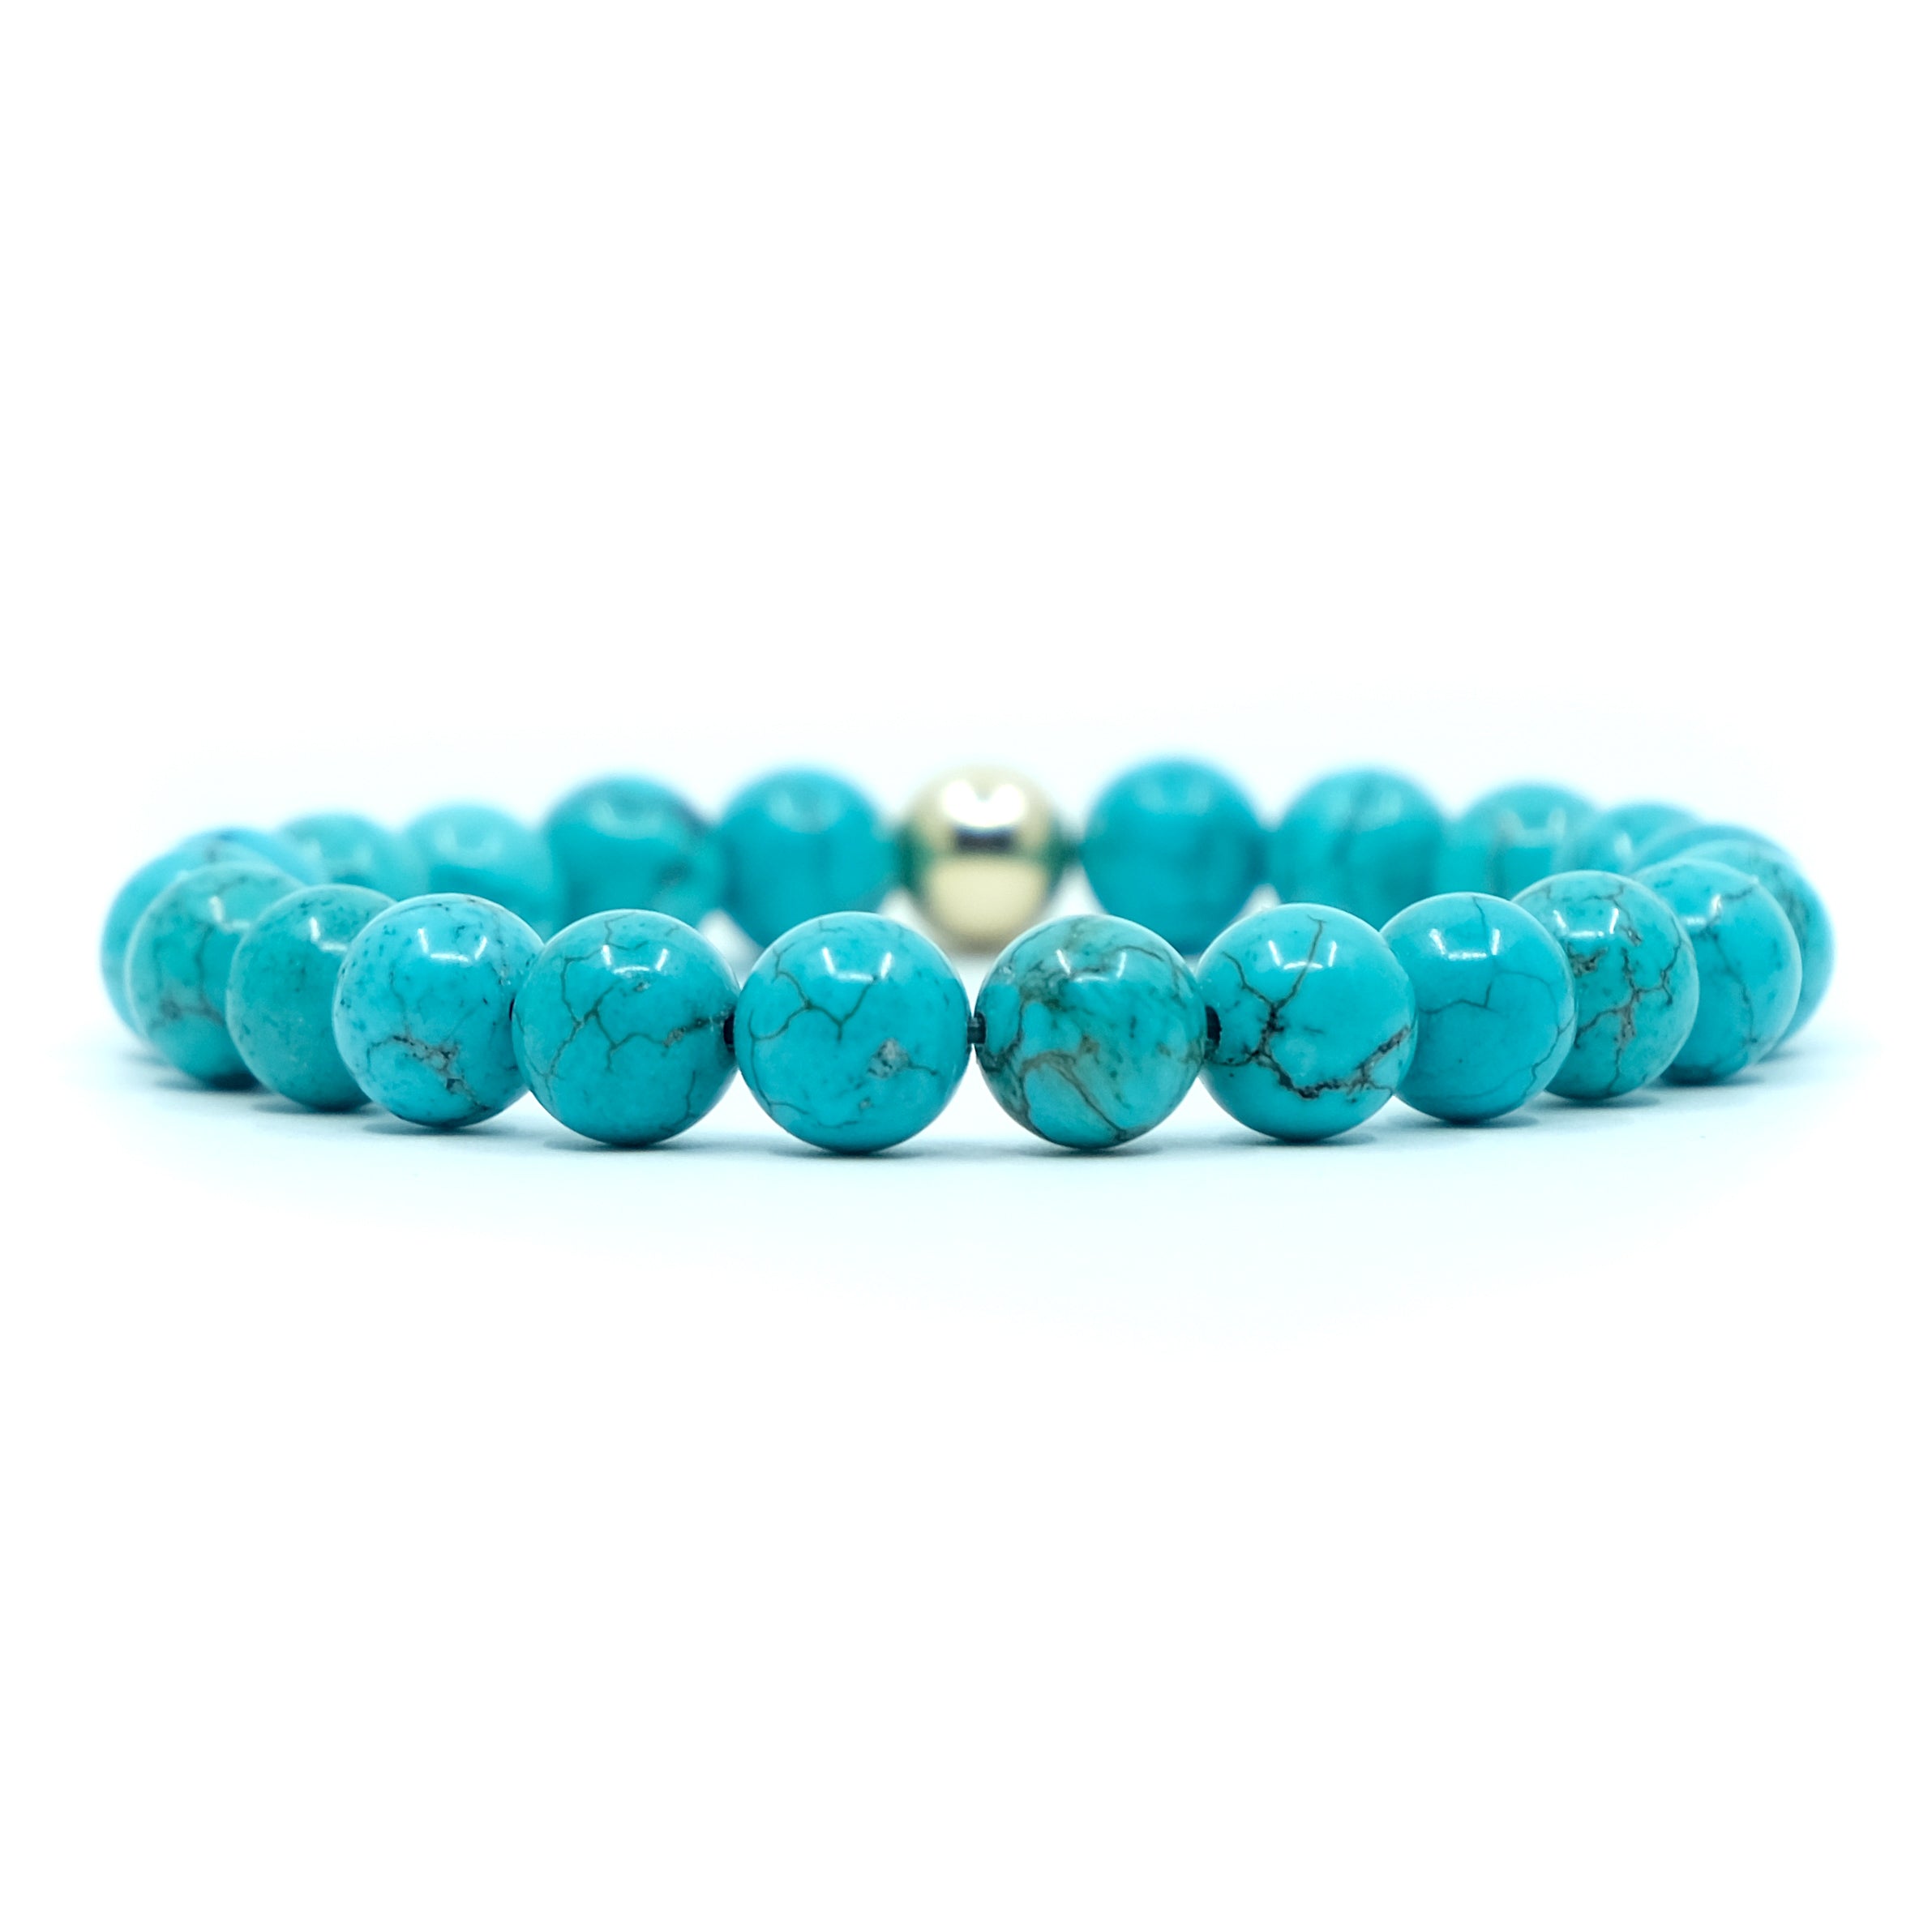 Turquoise gemstone stretch bracelet with gold filled feature bead